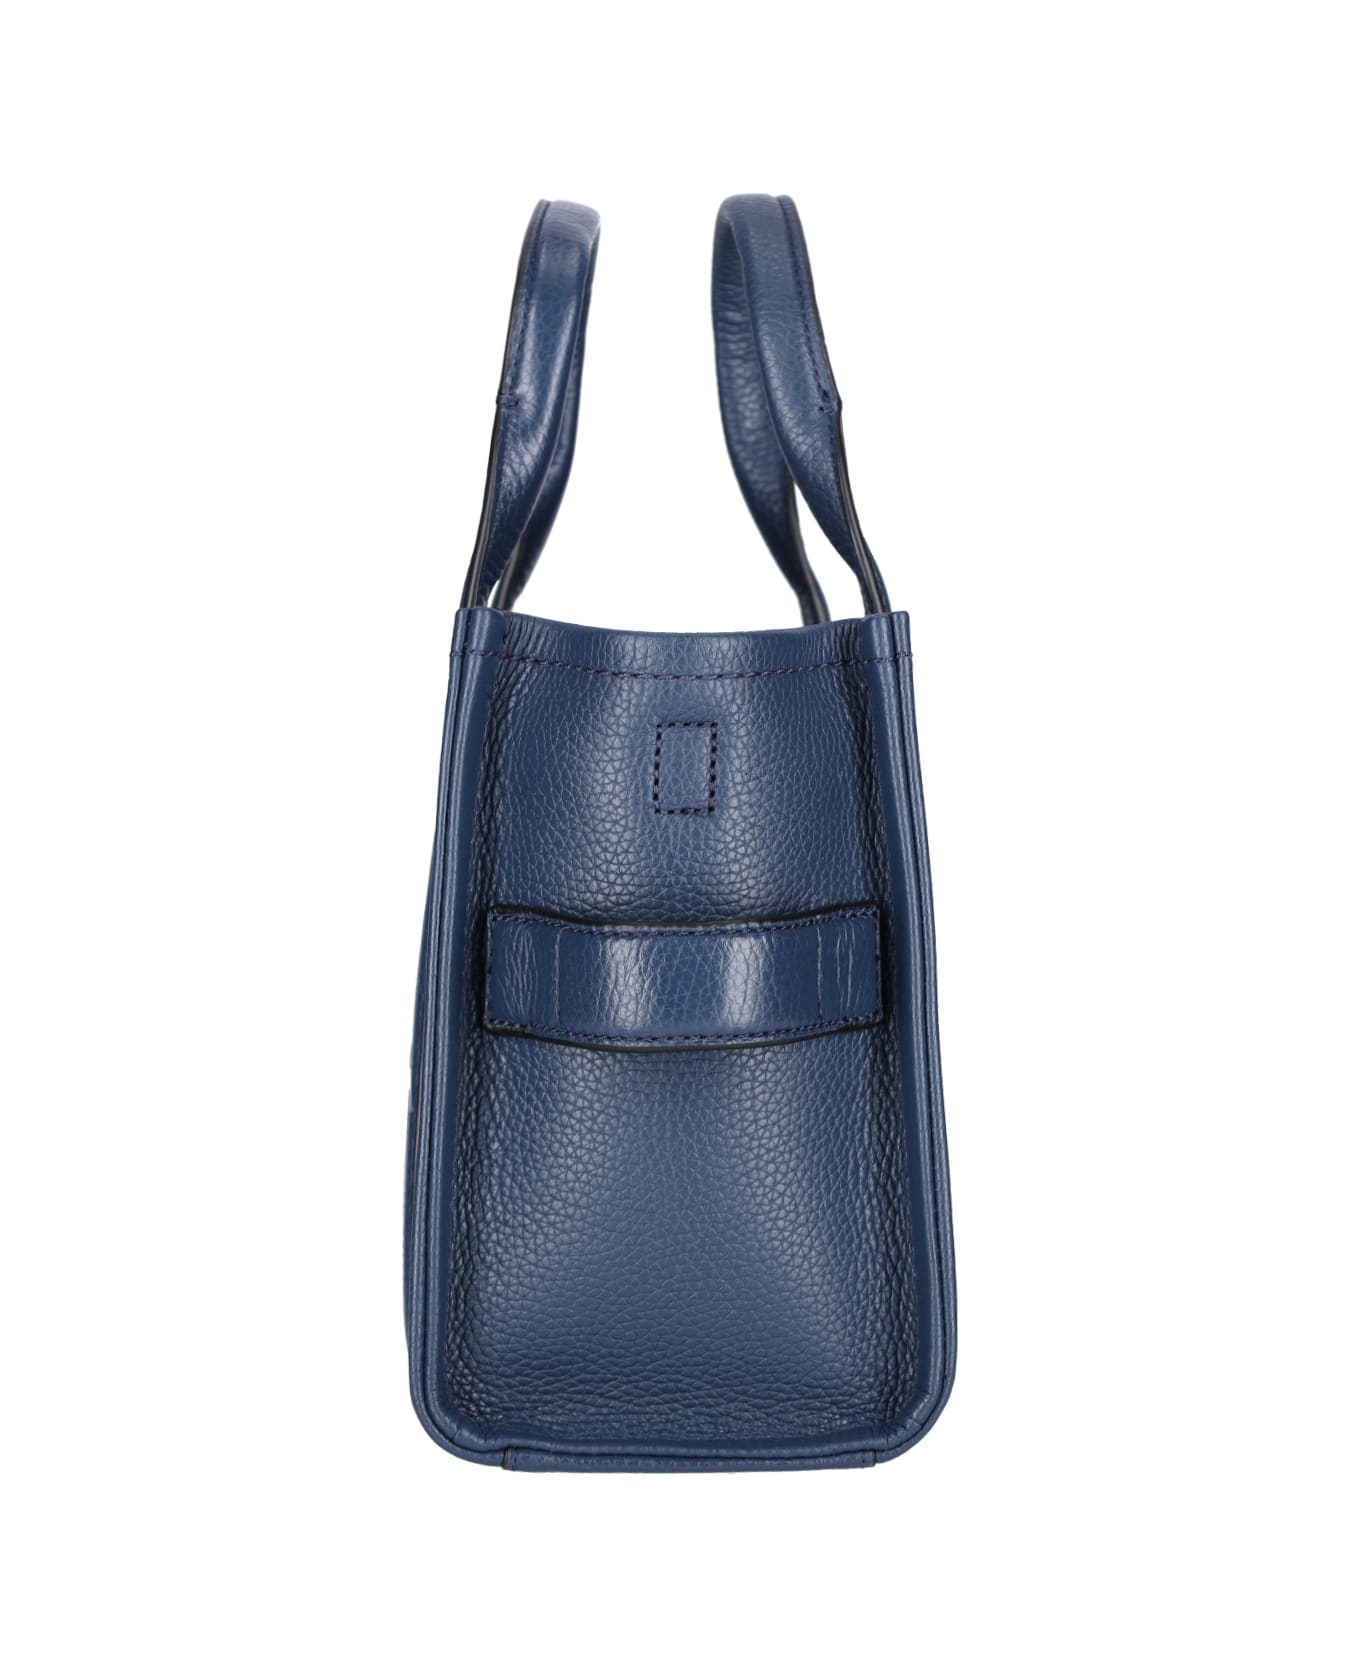 Marc Jacobs Leather Tote Bag - blue